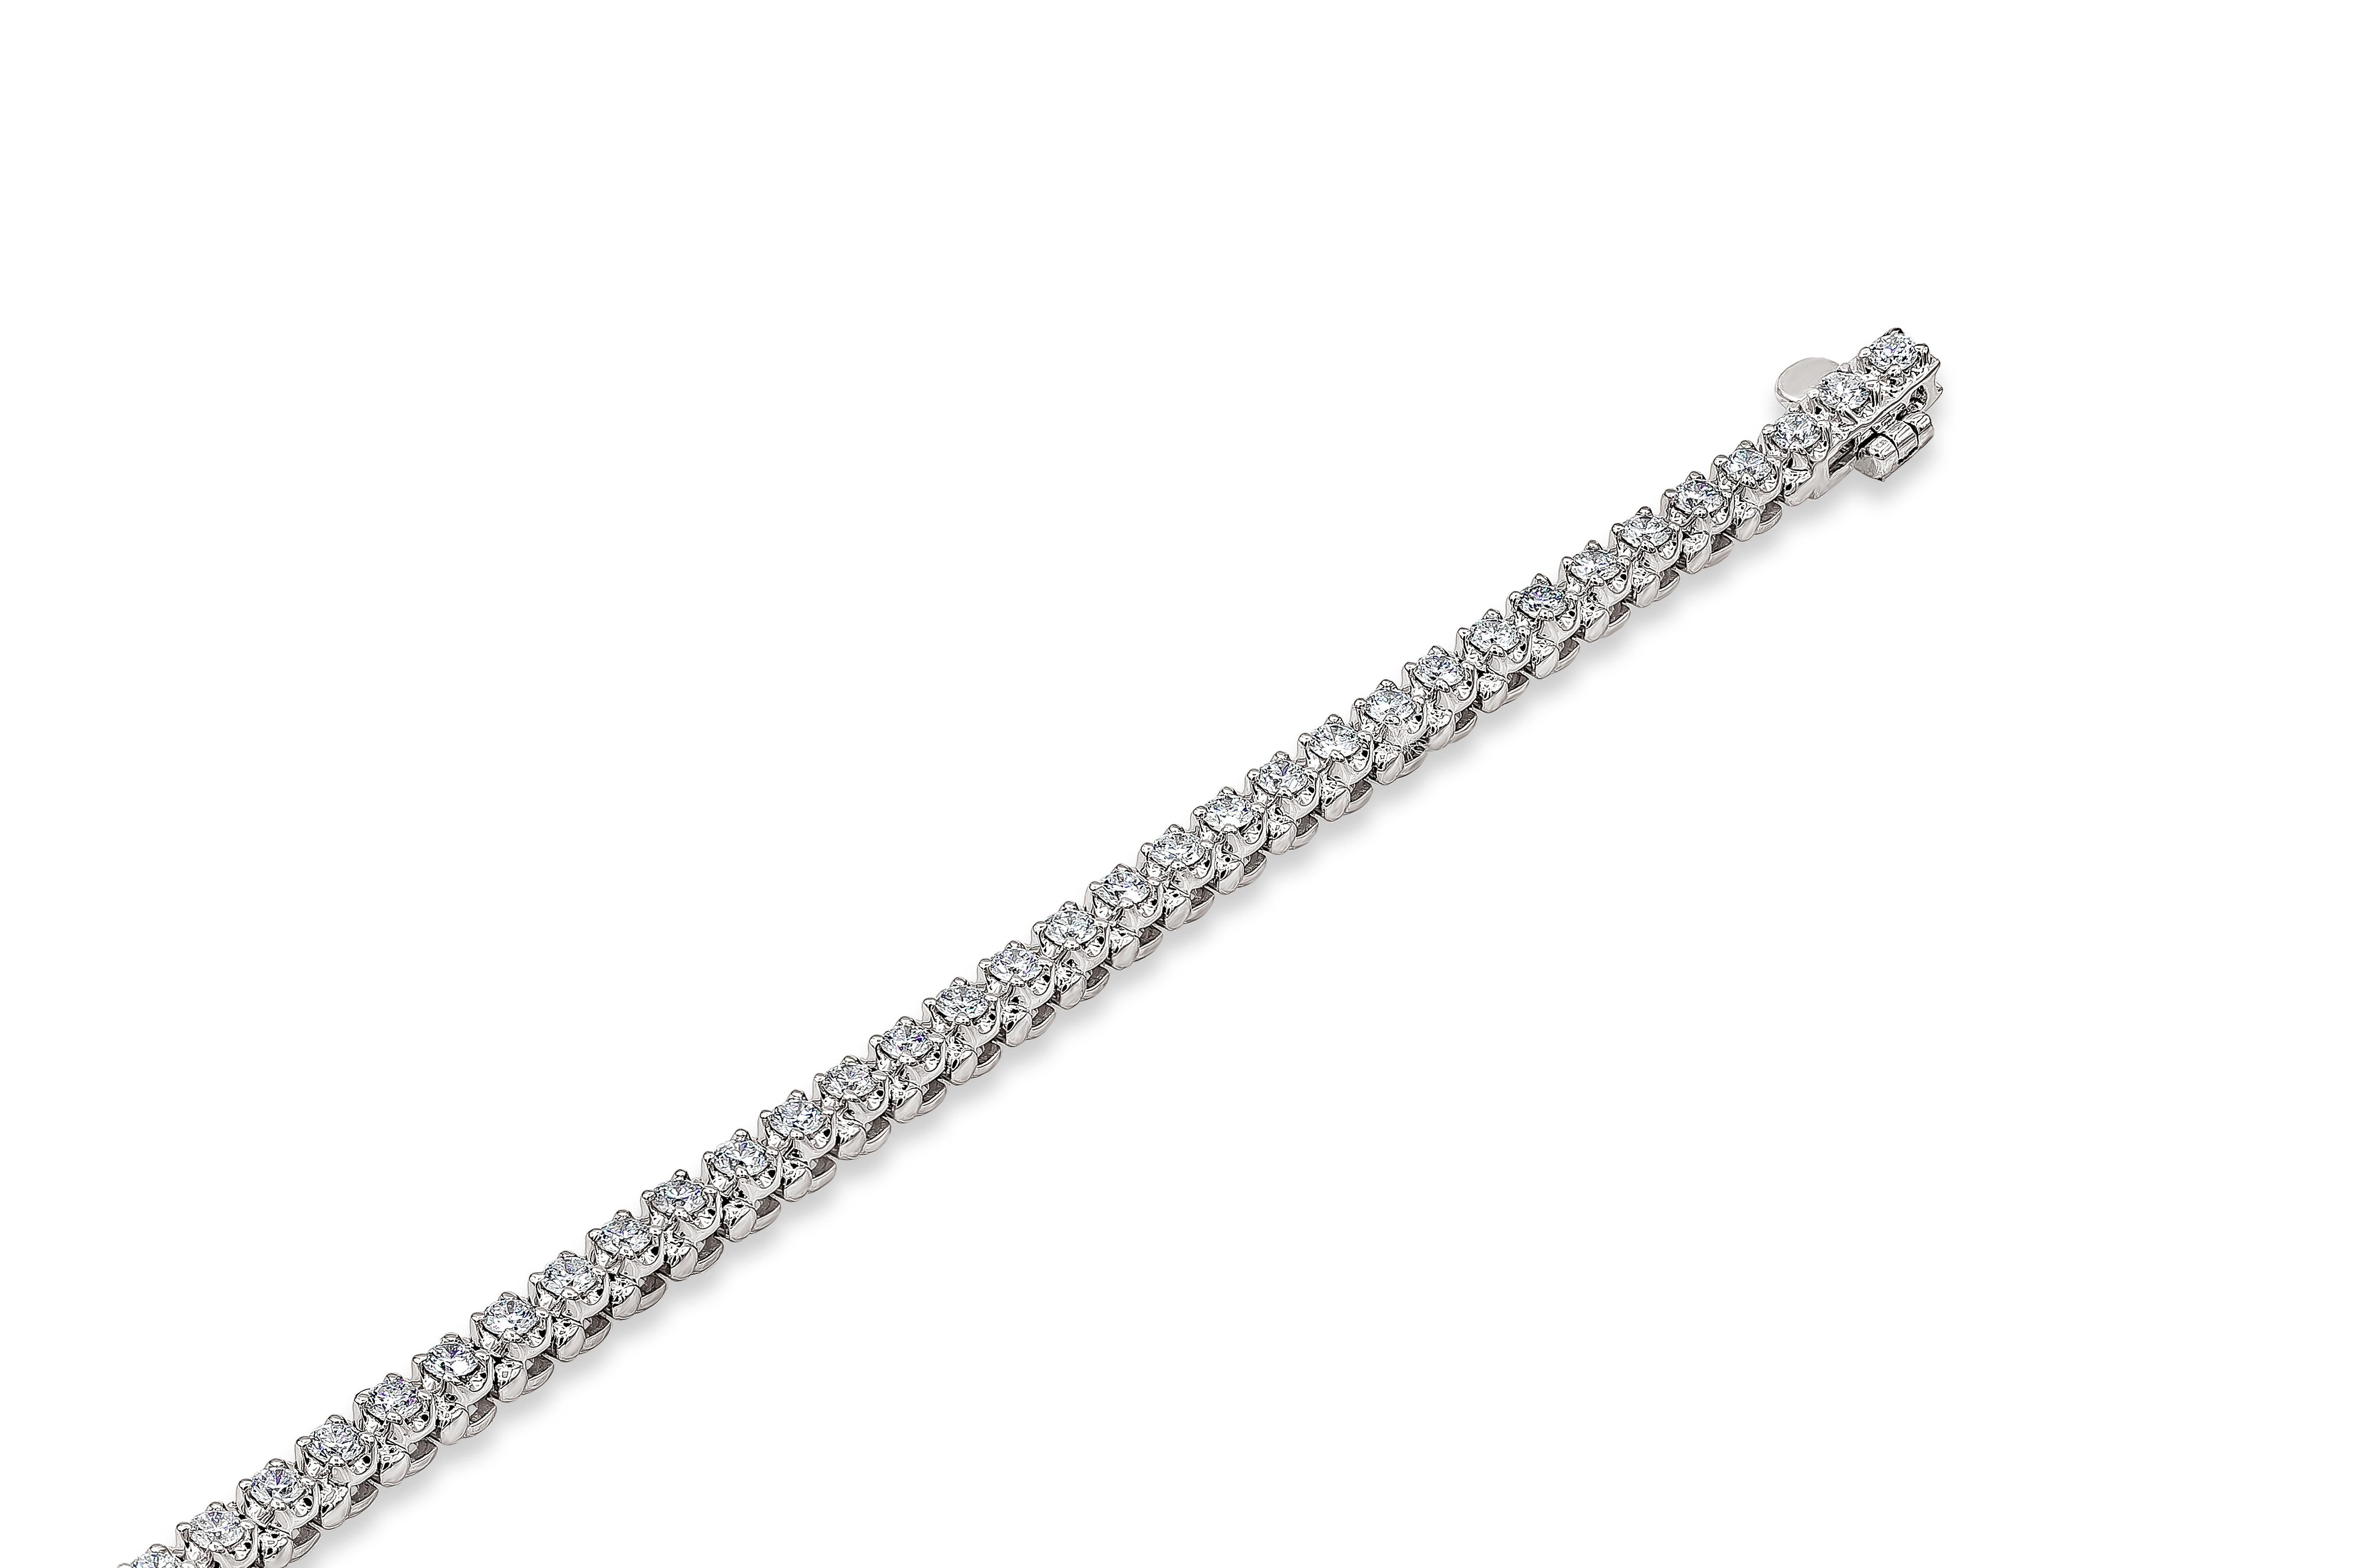 A chic tennis bracelet style that makes it look larger than it appears. Showcasing a row of round brilliant diamonds weighing 2.06 carats total, set in a polished 14k white gold mounting. 7 inches in length. Diamond quality, F color SI2